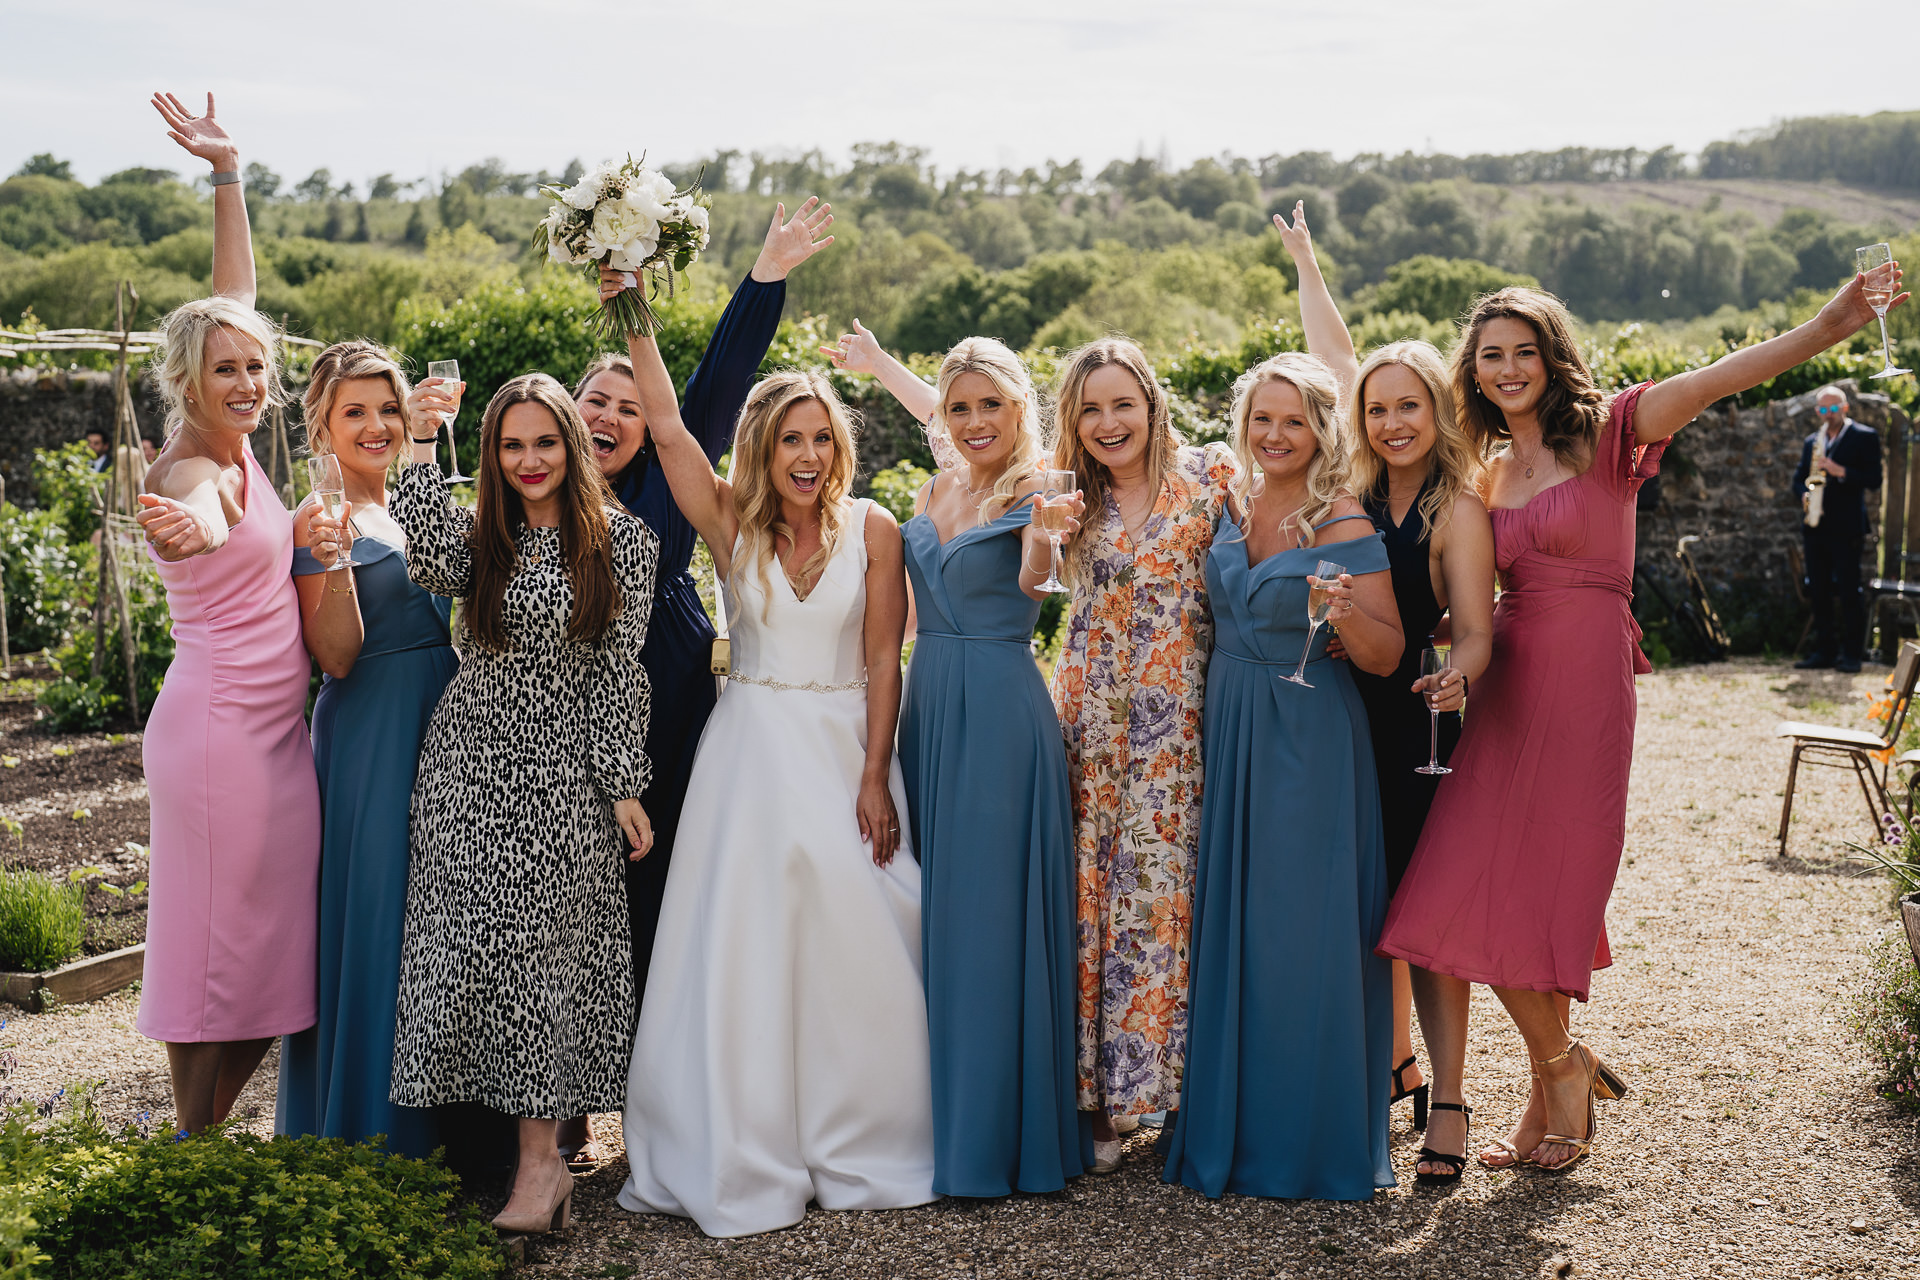 Bride with a group of female wedding guests smiling at the camera